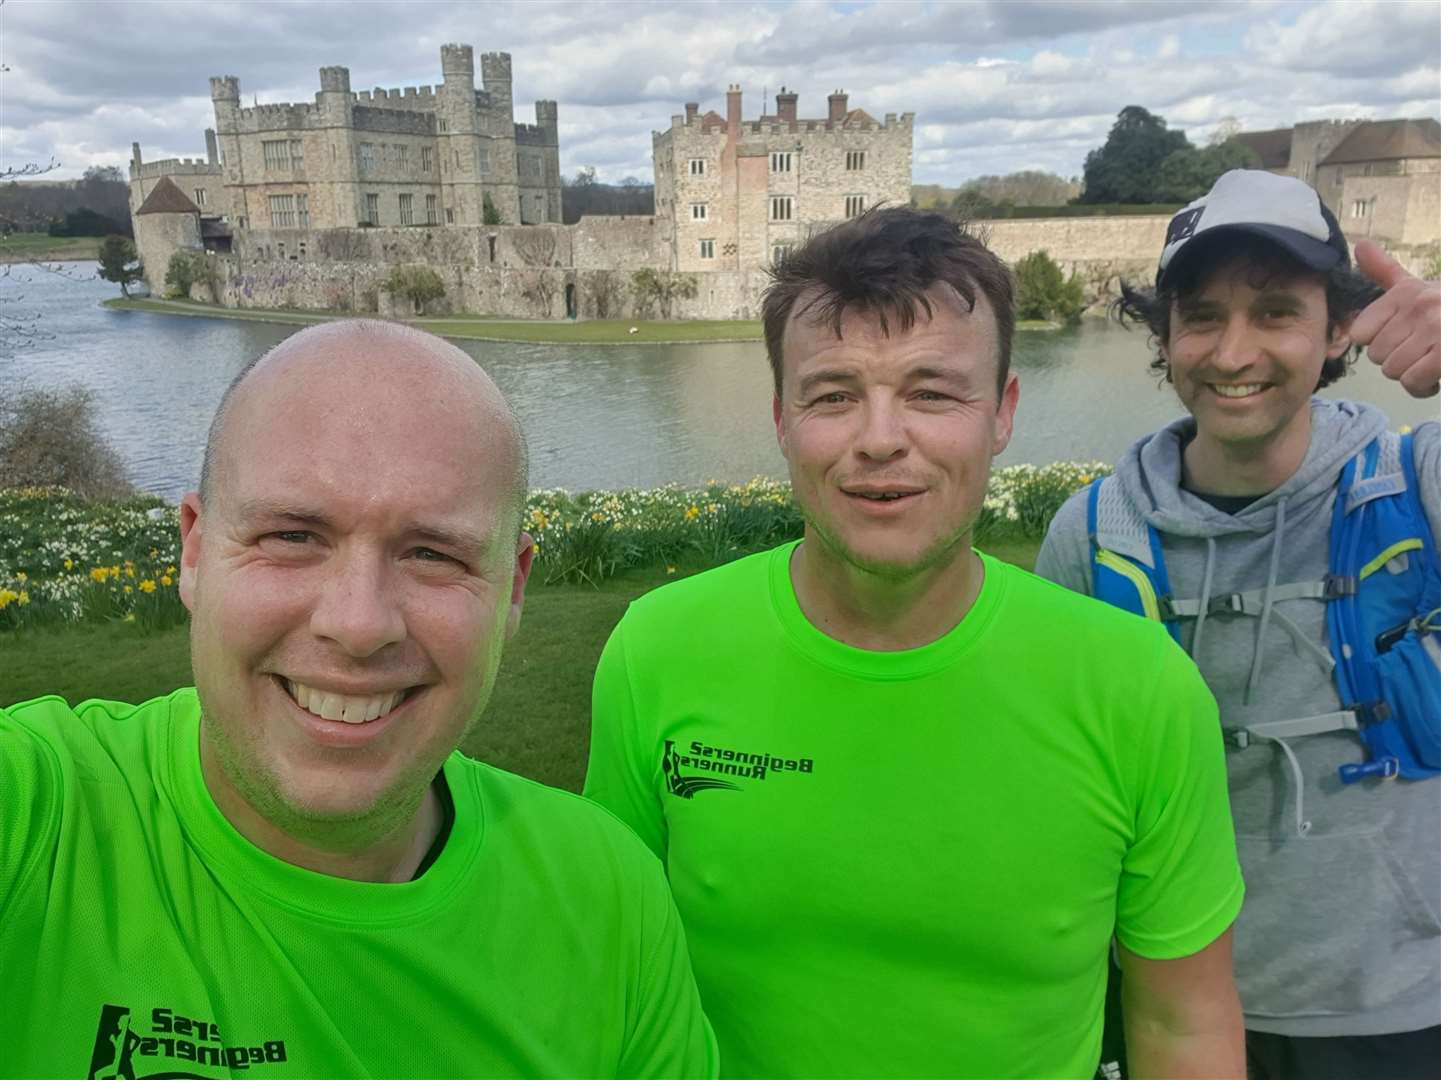 Steve Grantham and fellow runners at Leeds Castle